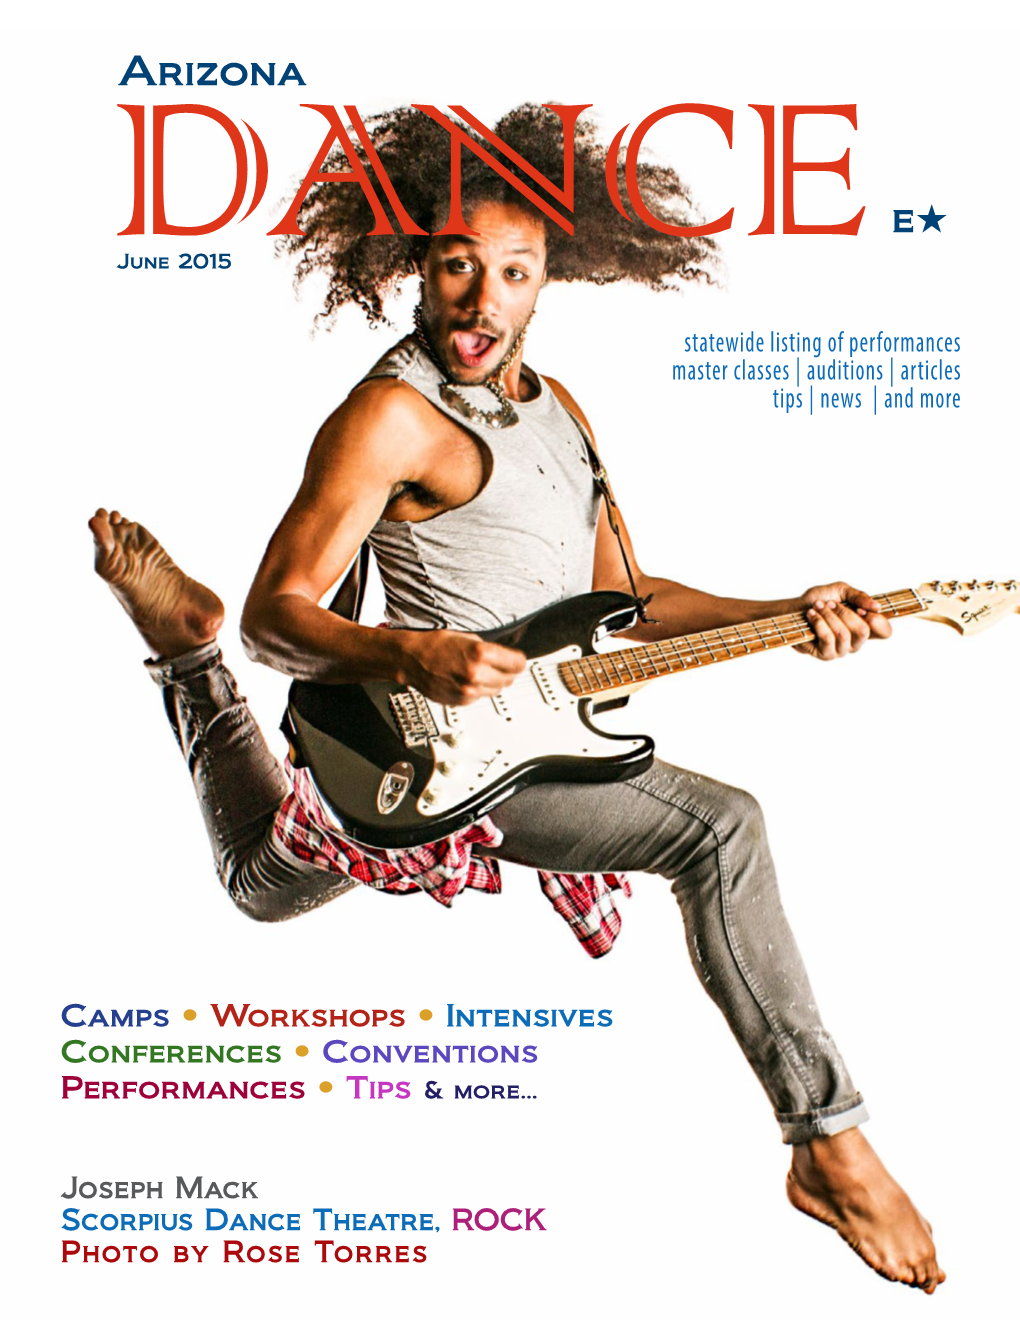 June 2015 Statewide Listing of Performances Master Classes | Auditions | Articles Tips | News | and More